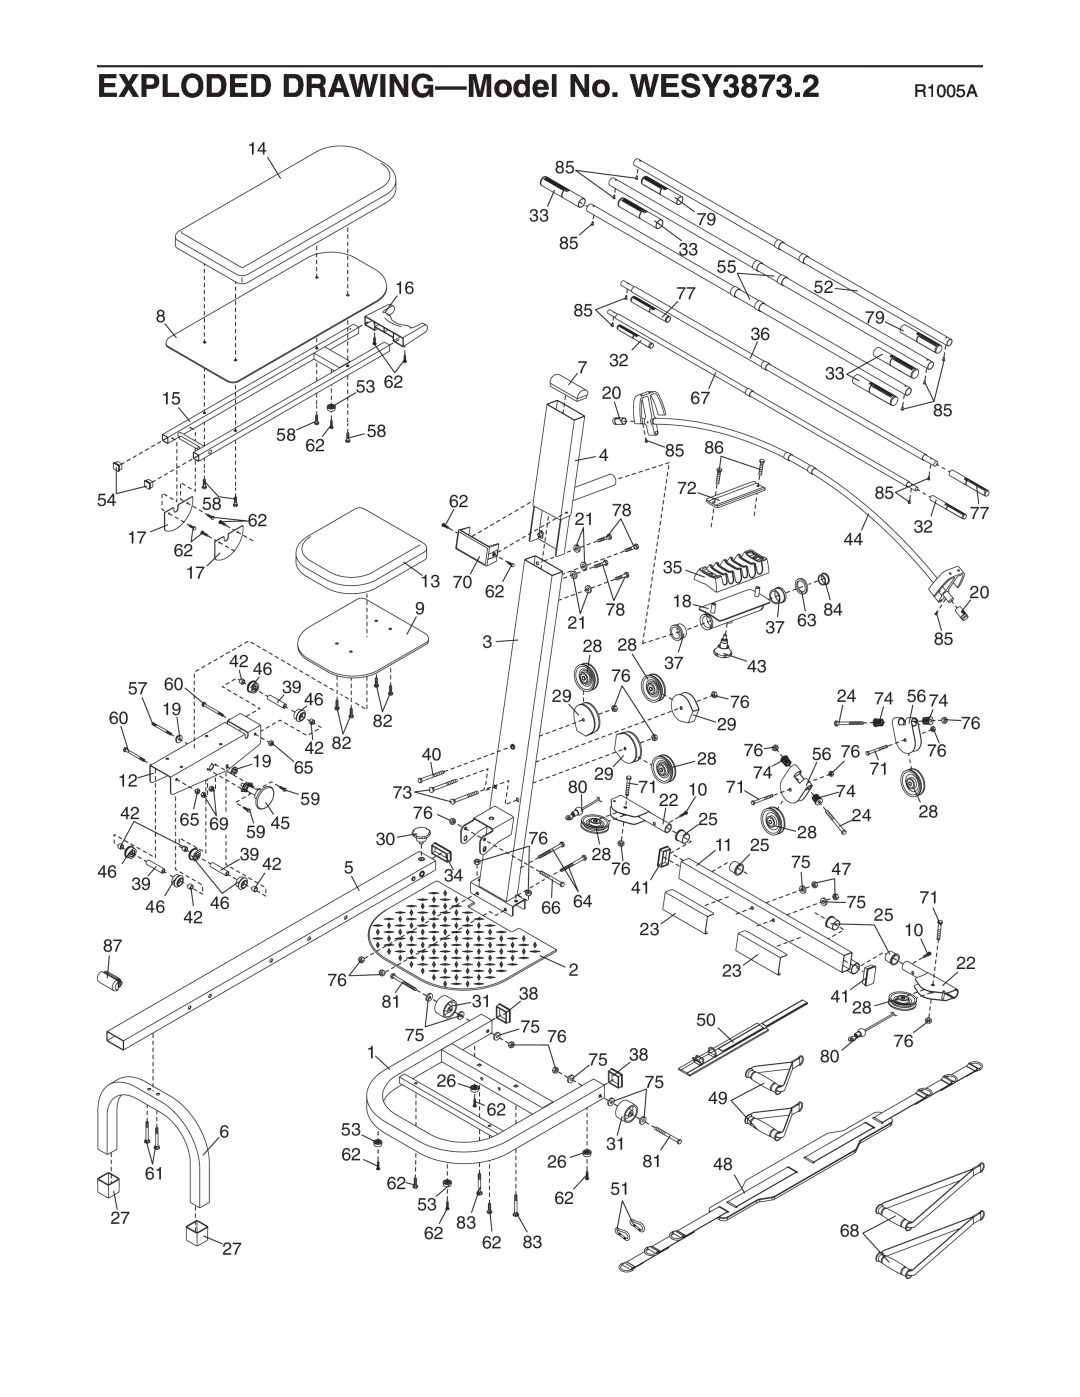 Weider user manual EXPLODED DRAWING-Model No. WESY3873.2, R1005A 